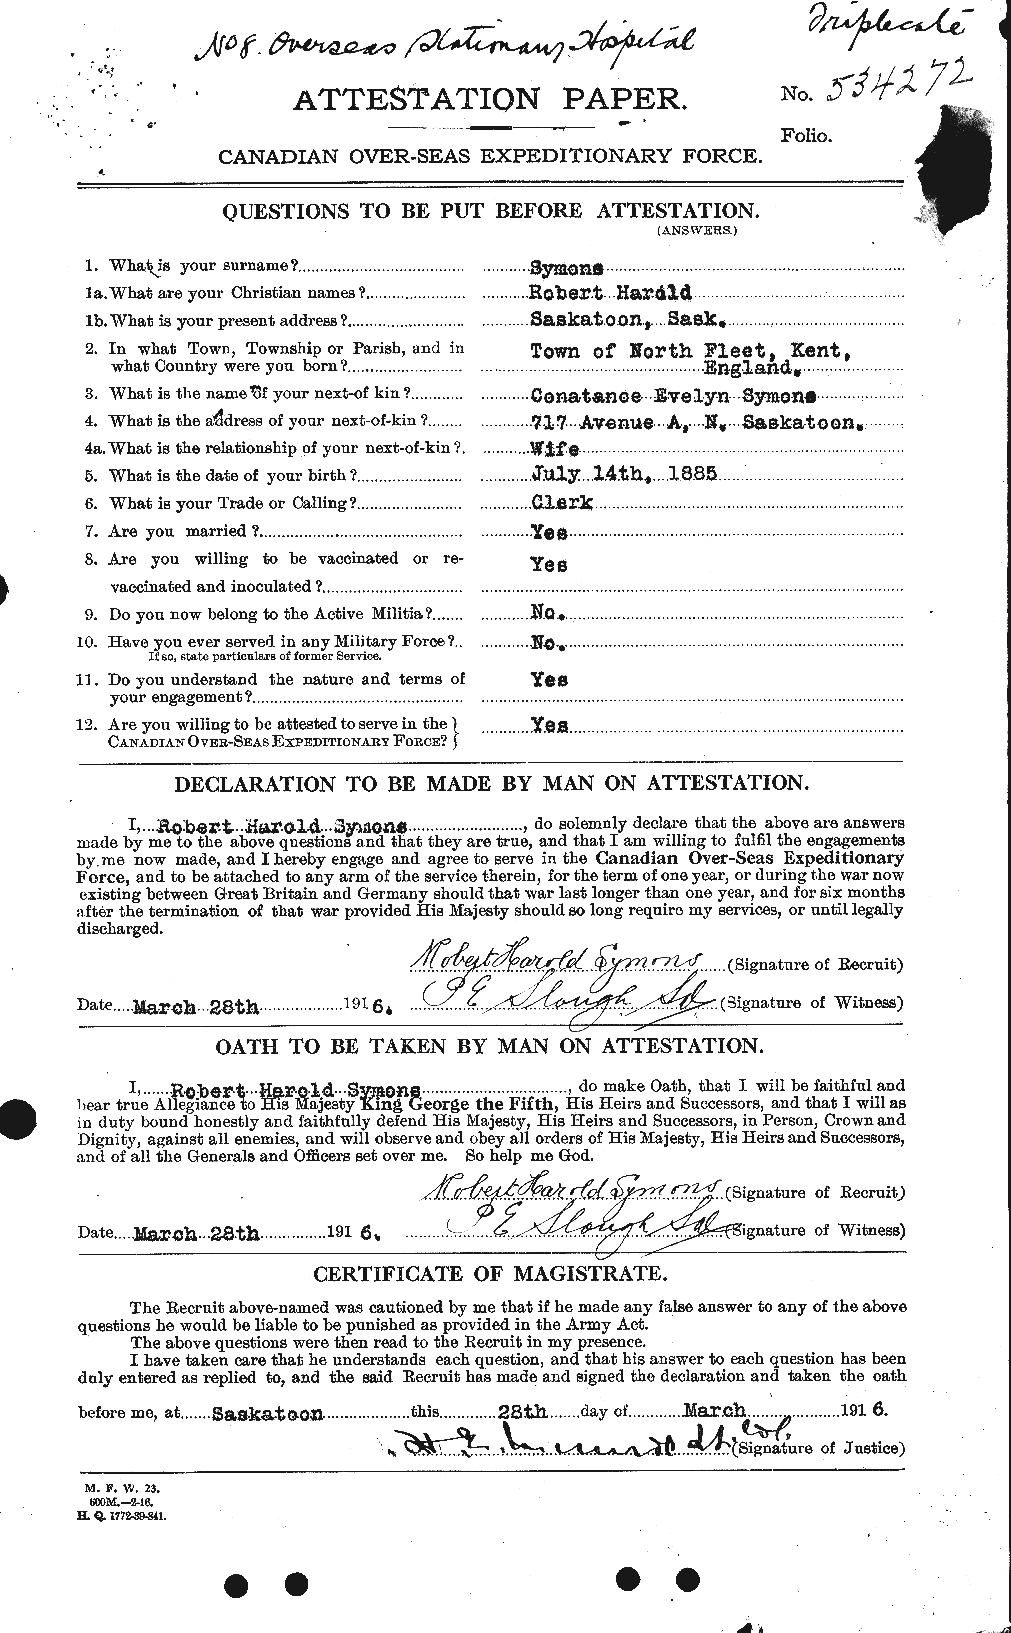 Personnel Records of the First World War - CEF 129026a